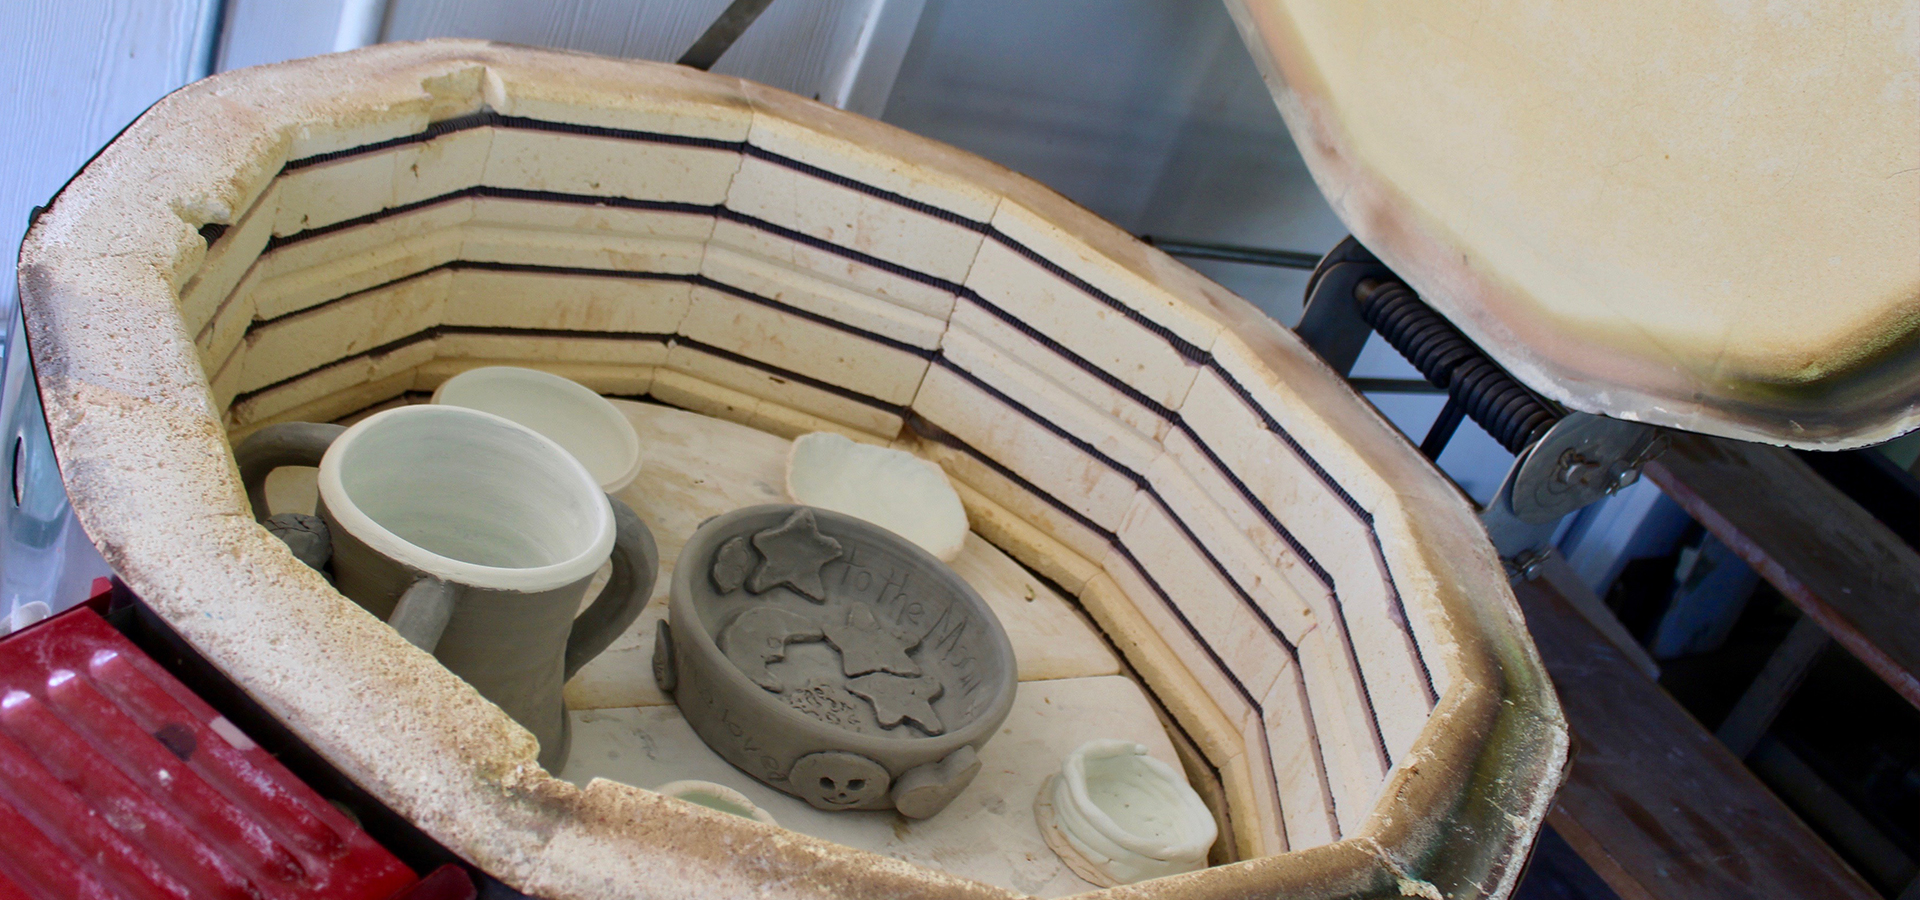 pottery ready to be baked at the art station.